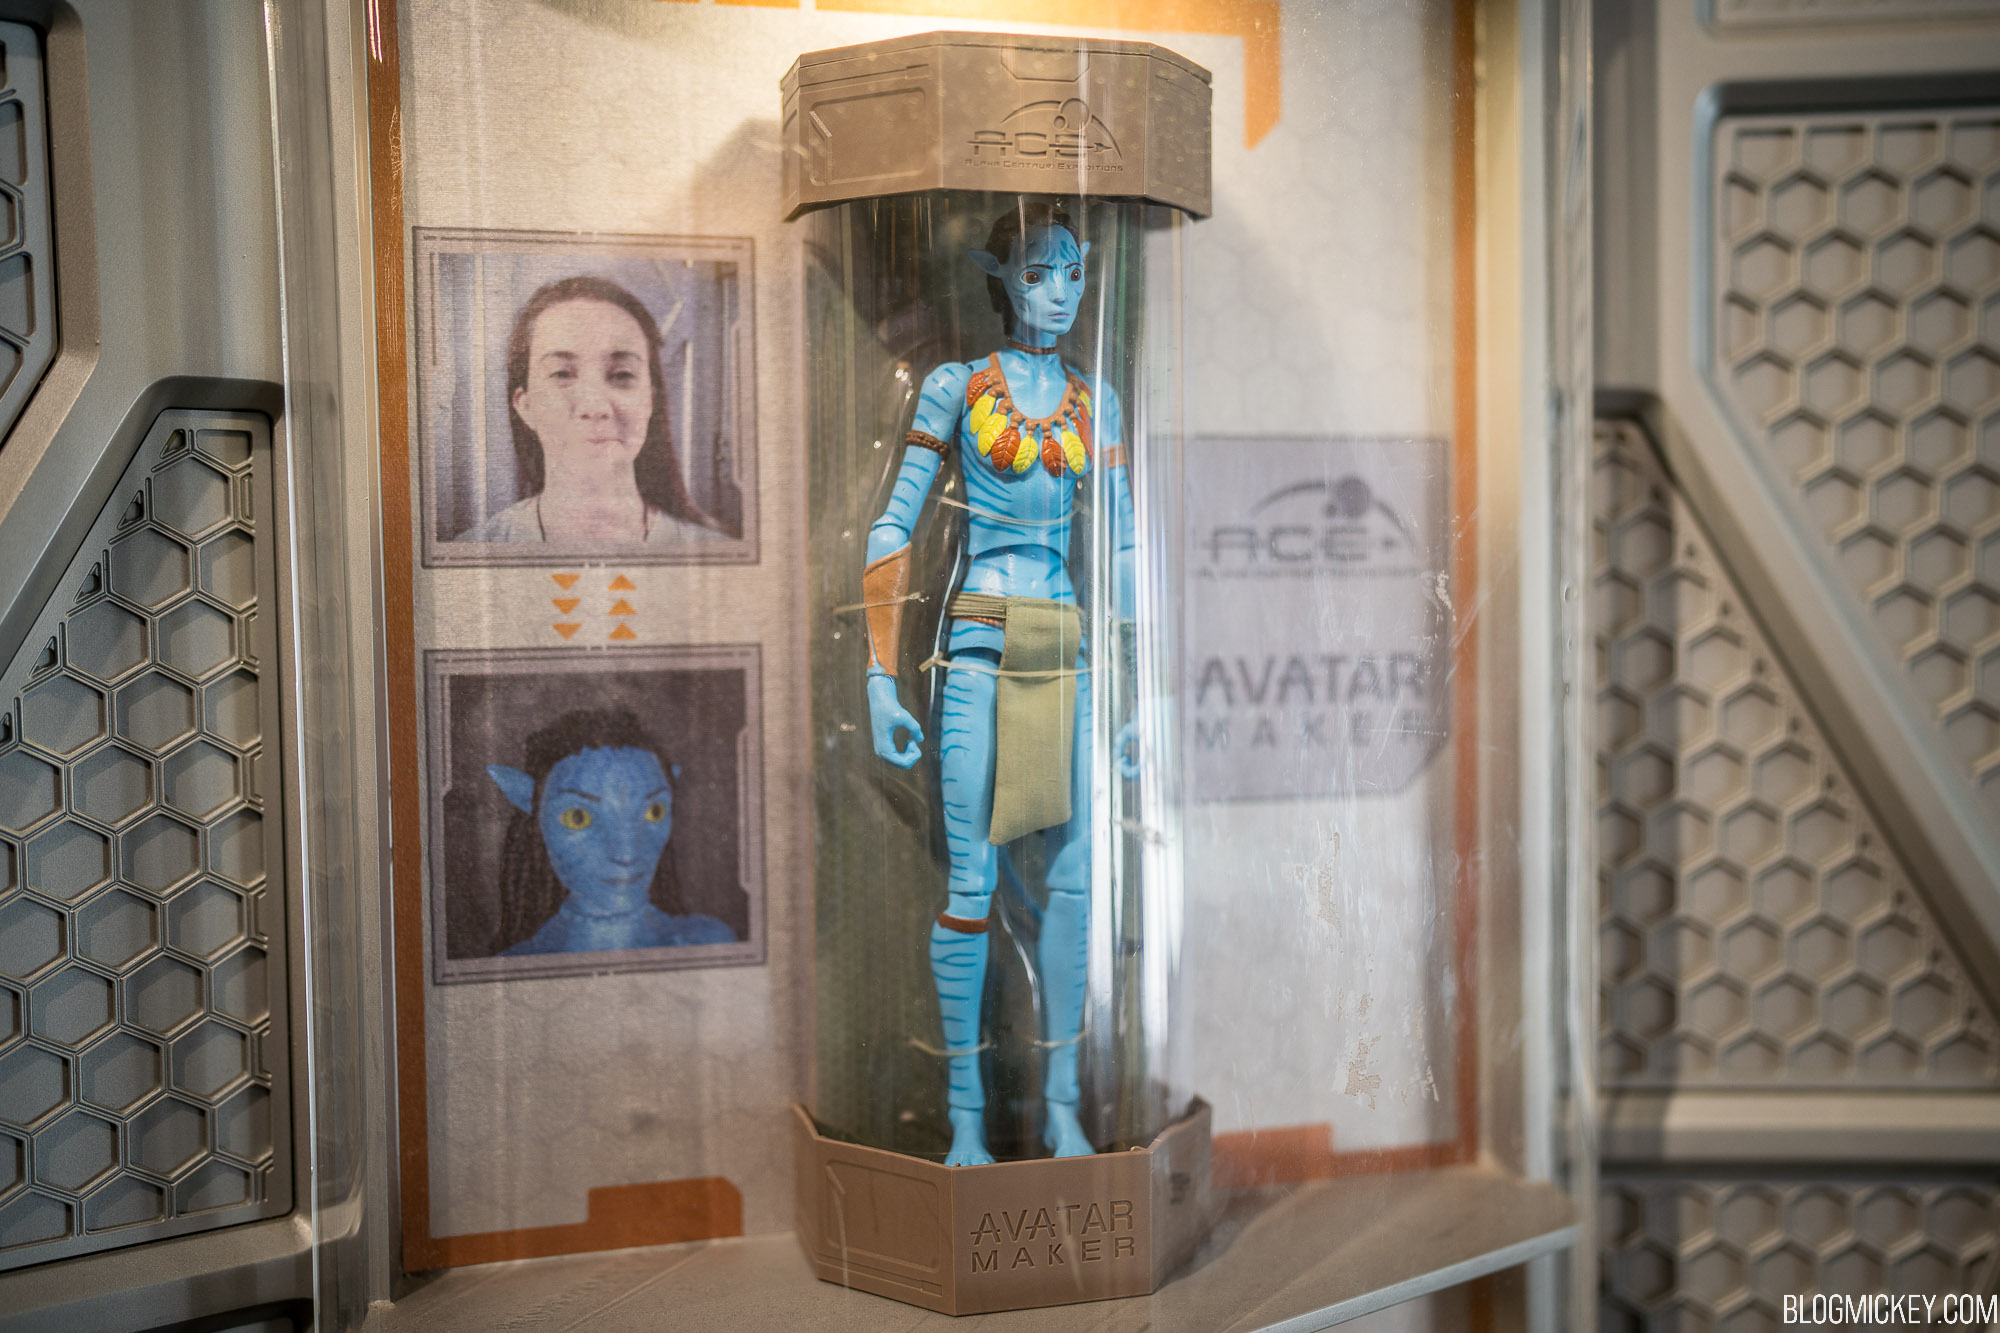 Create Your Own Avatar Action Figure at ACE Avatar Maker in Pandora  The  World of Avatar  Disney Parks Blog